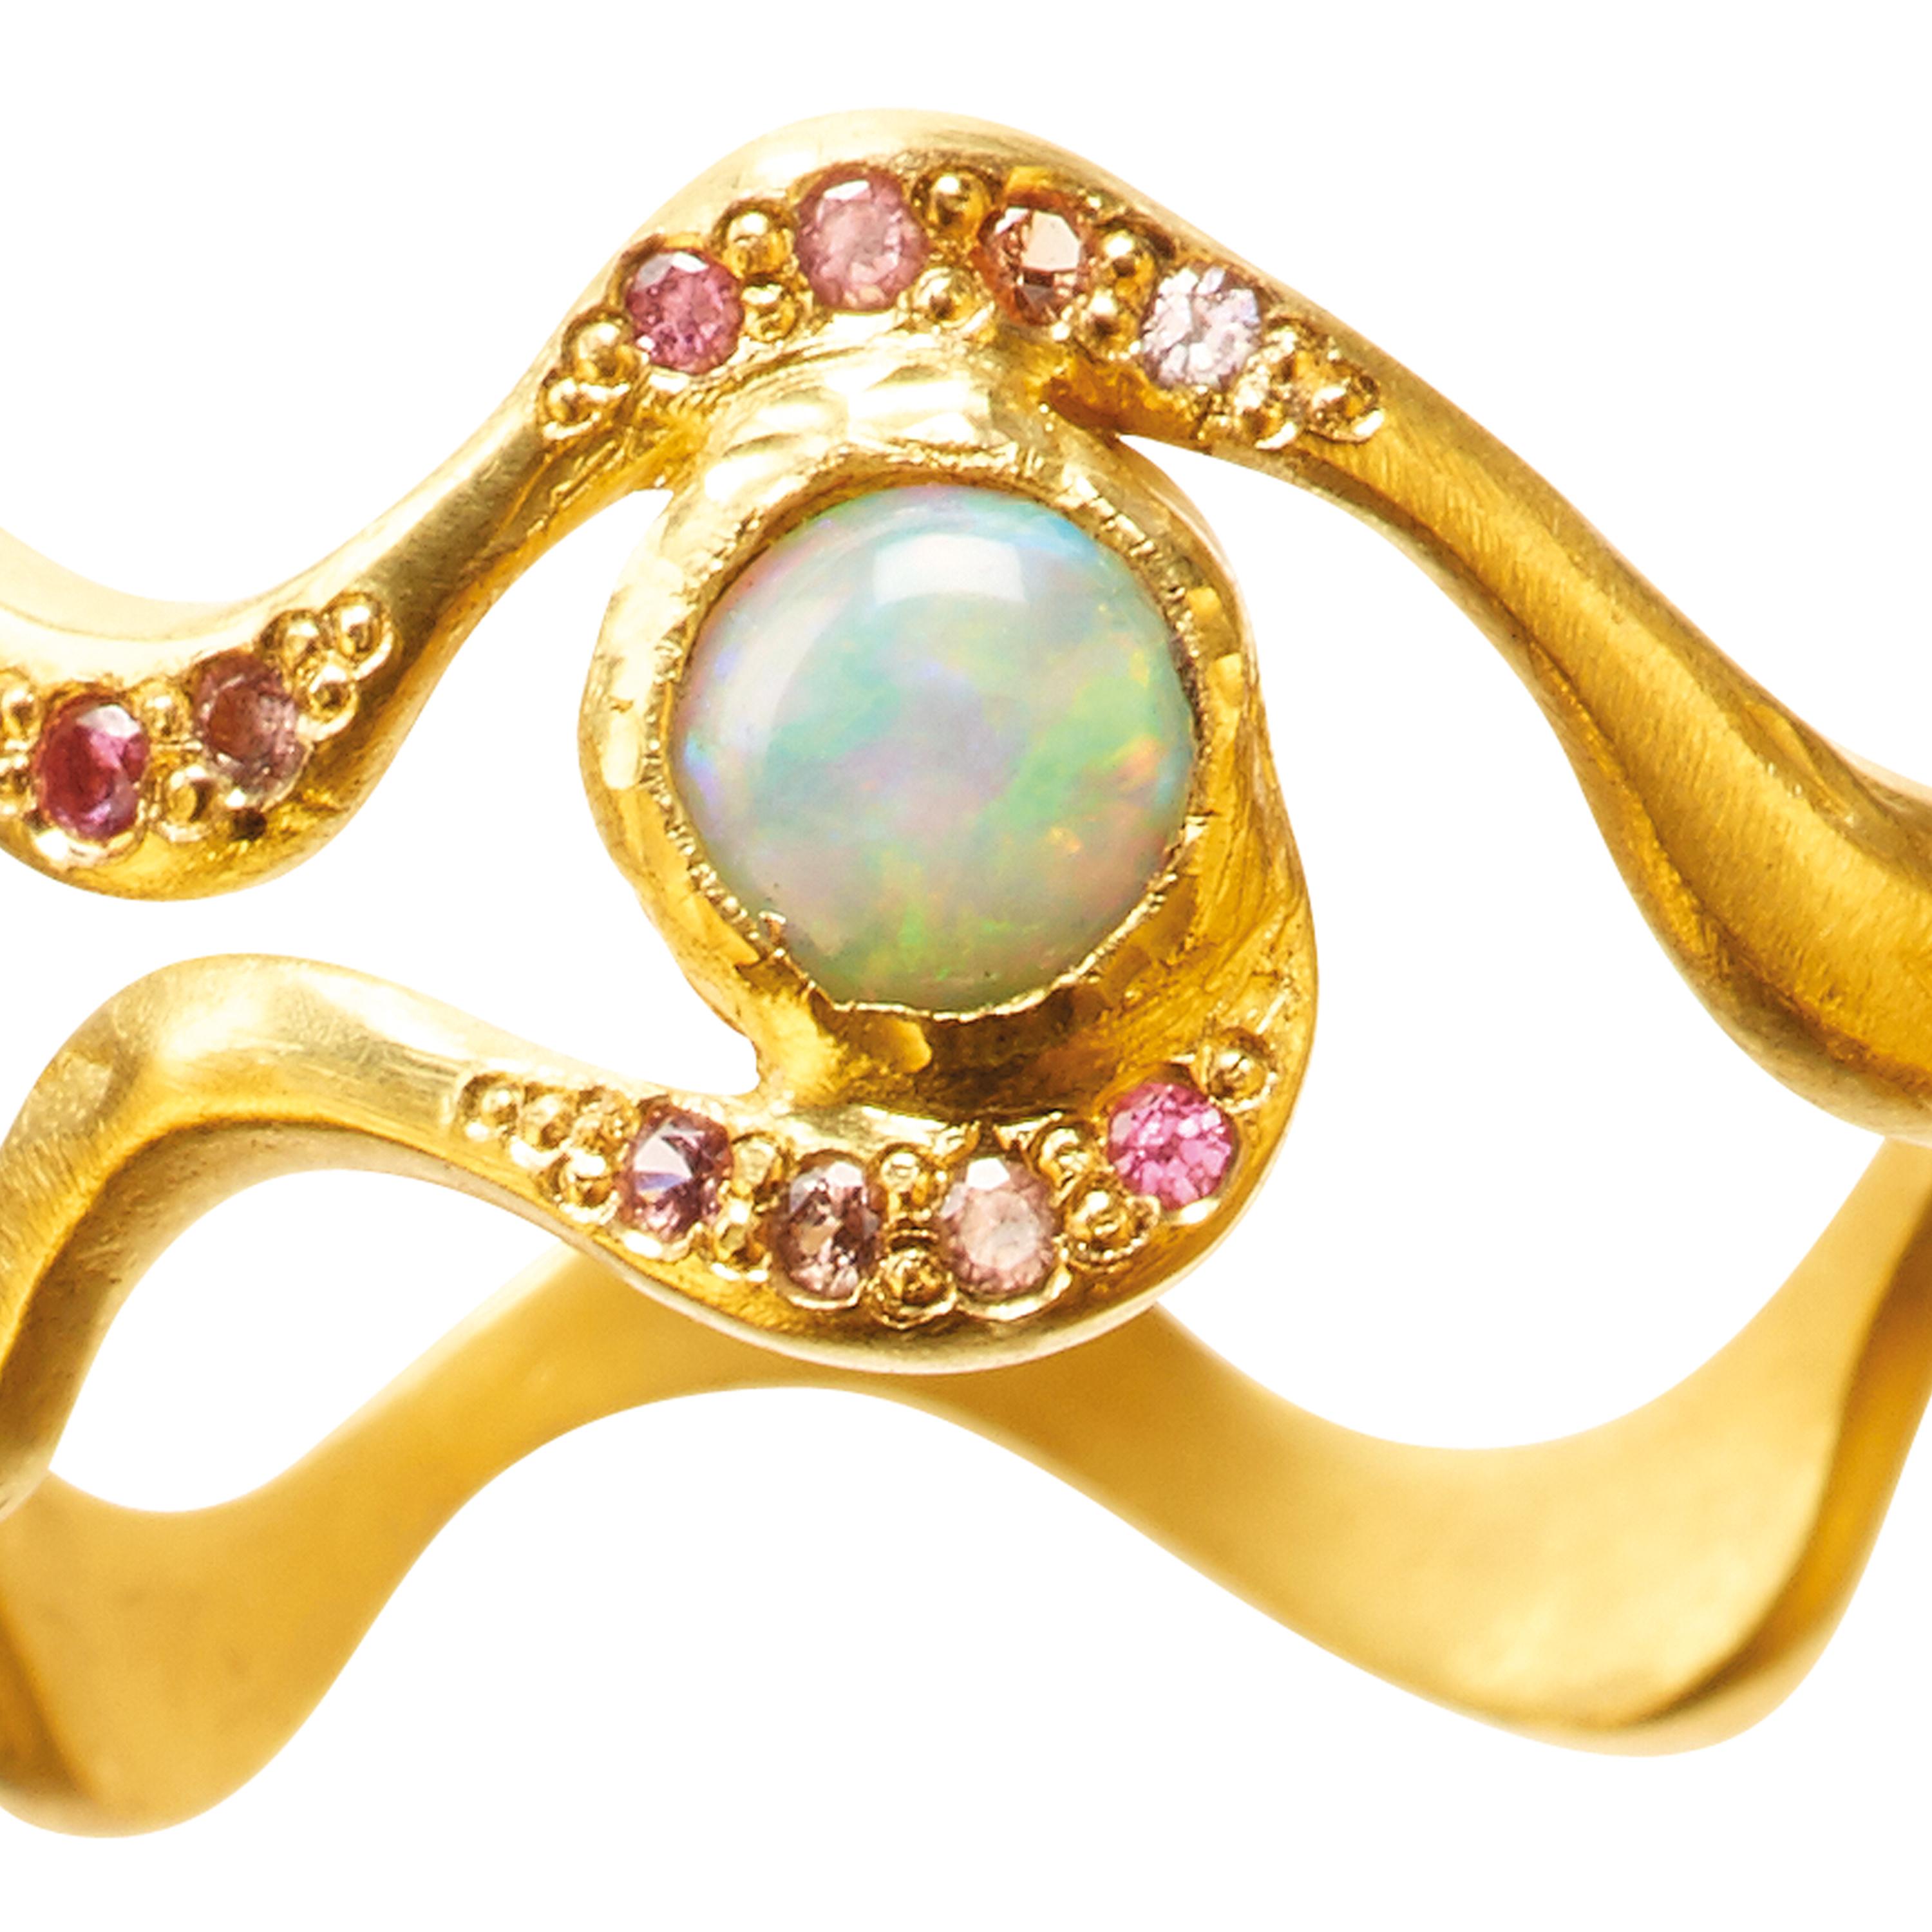 18 Karat Gold Opal Eye Ring with White Water Opal and Pink Spinels In New Condition For Sale In Copenhagen, Bornholm